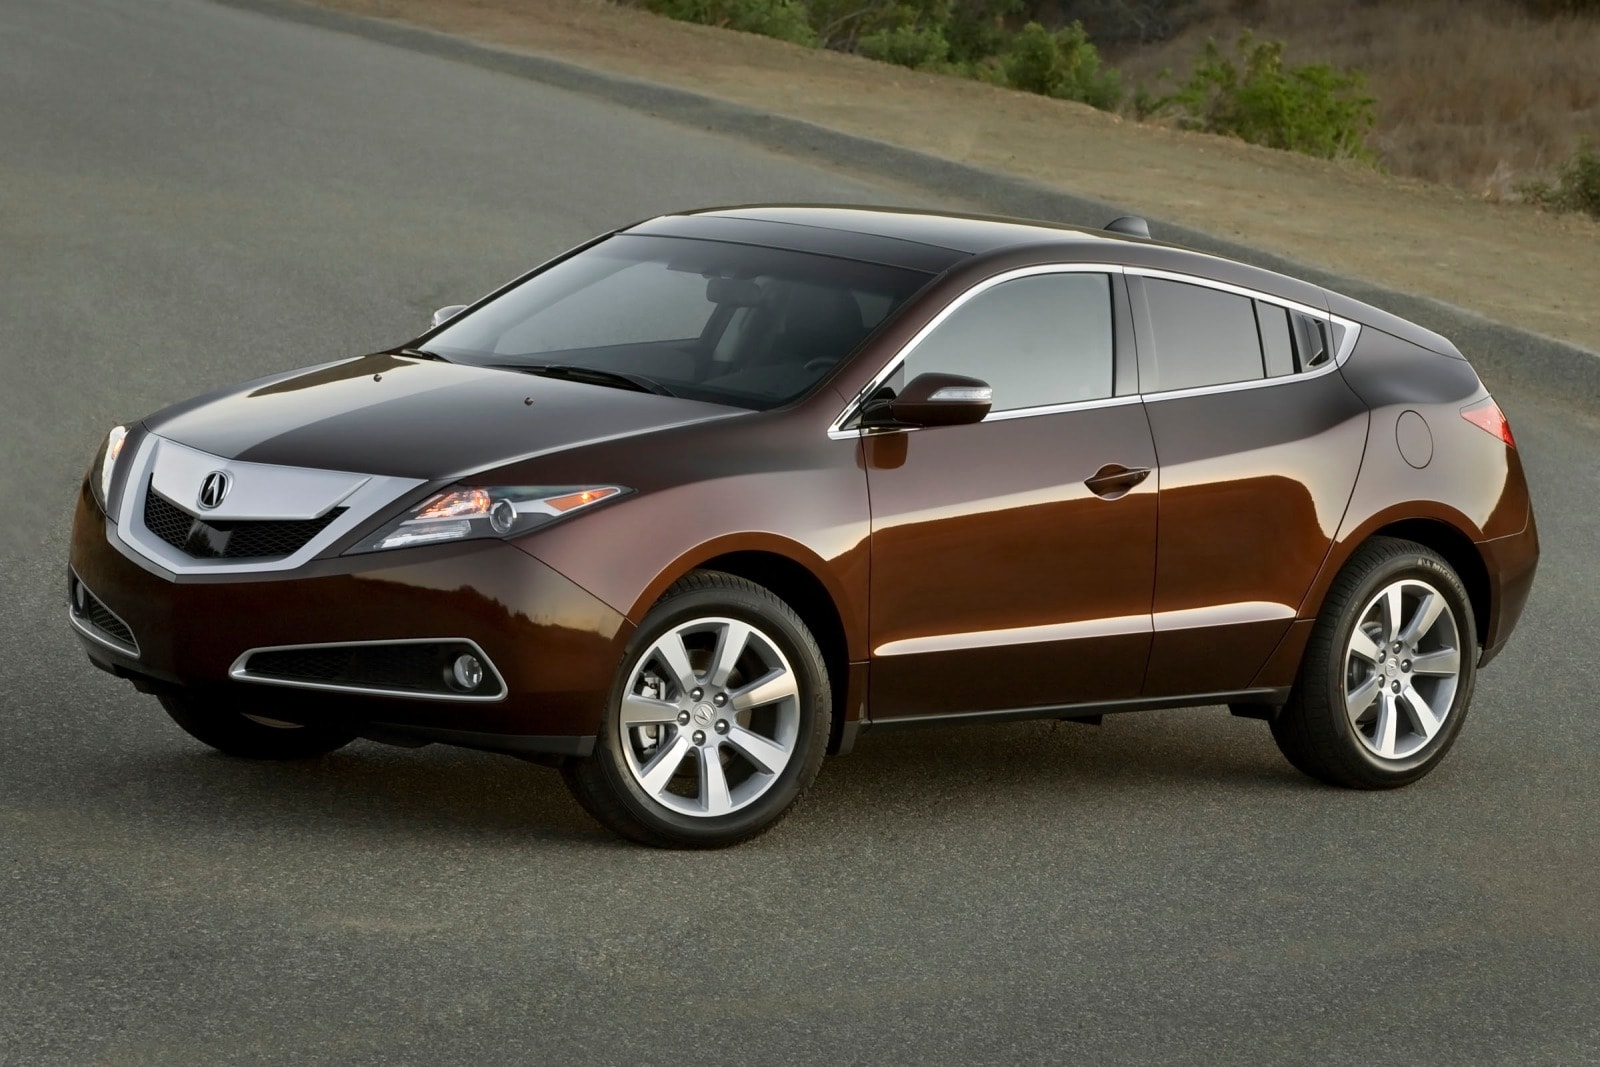 2012 Acura ZDX Review & Ratings | Edmunds